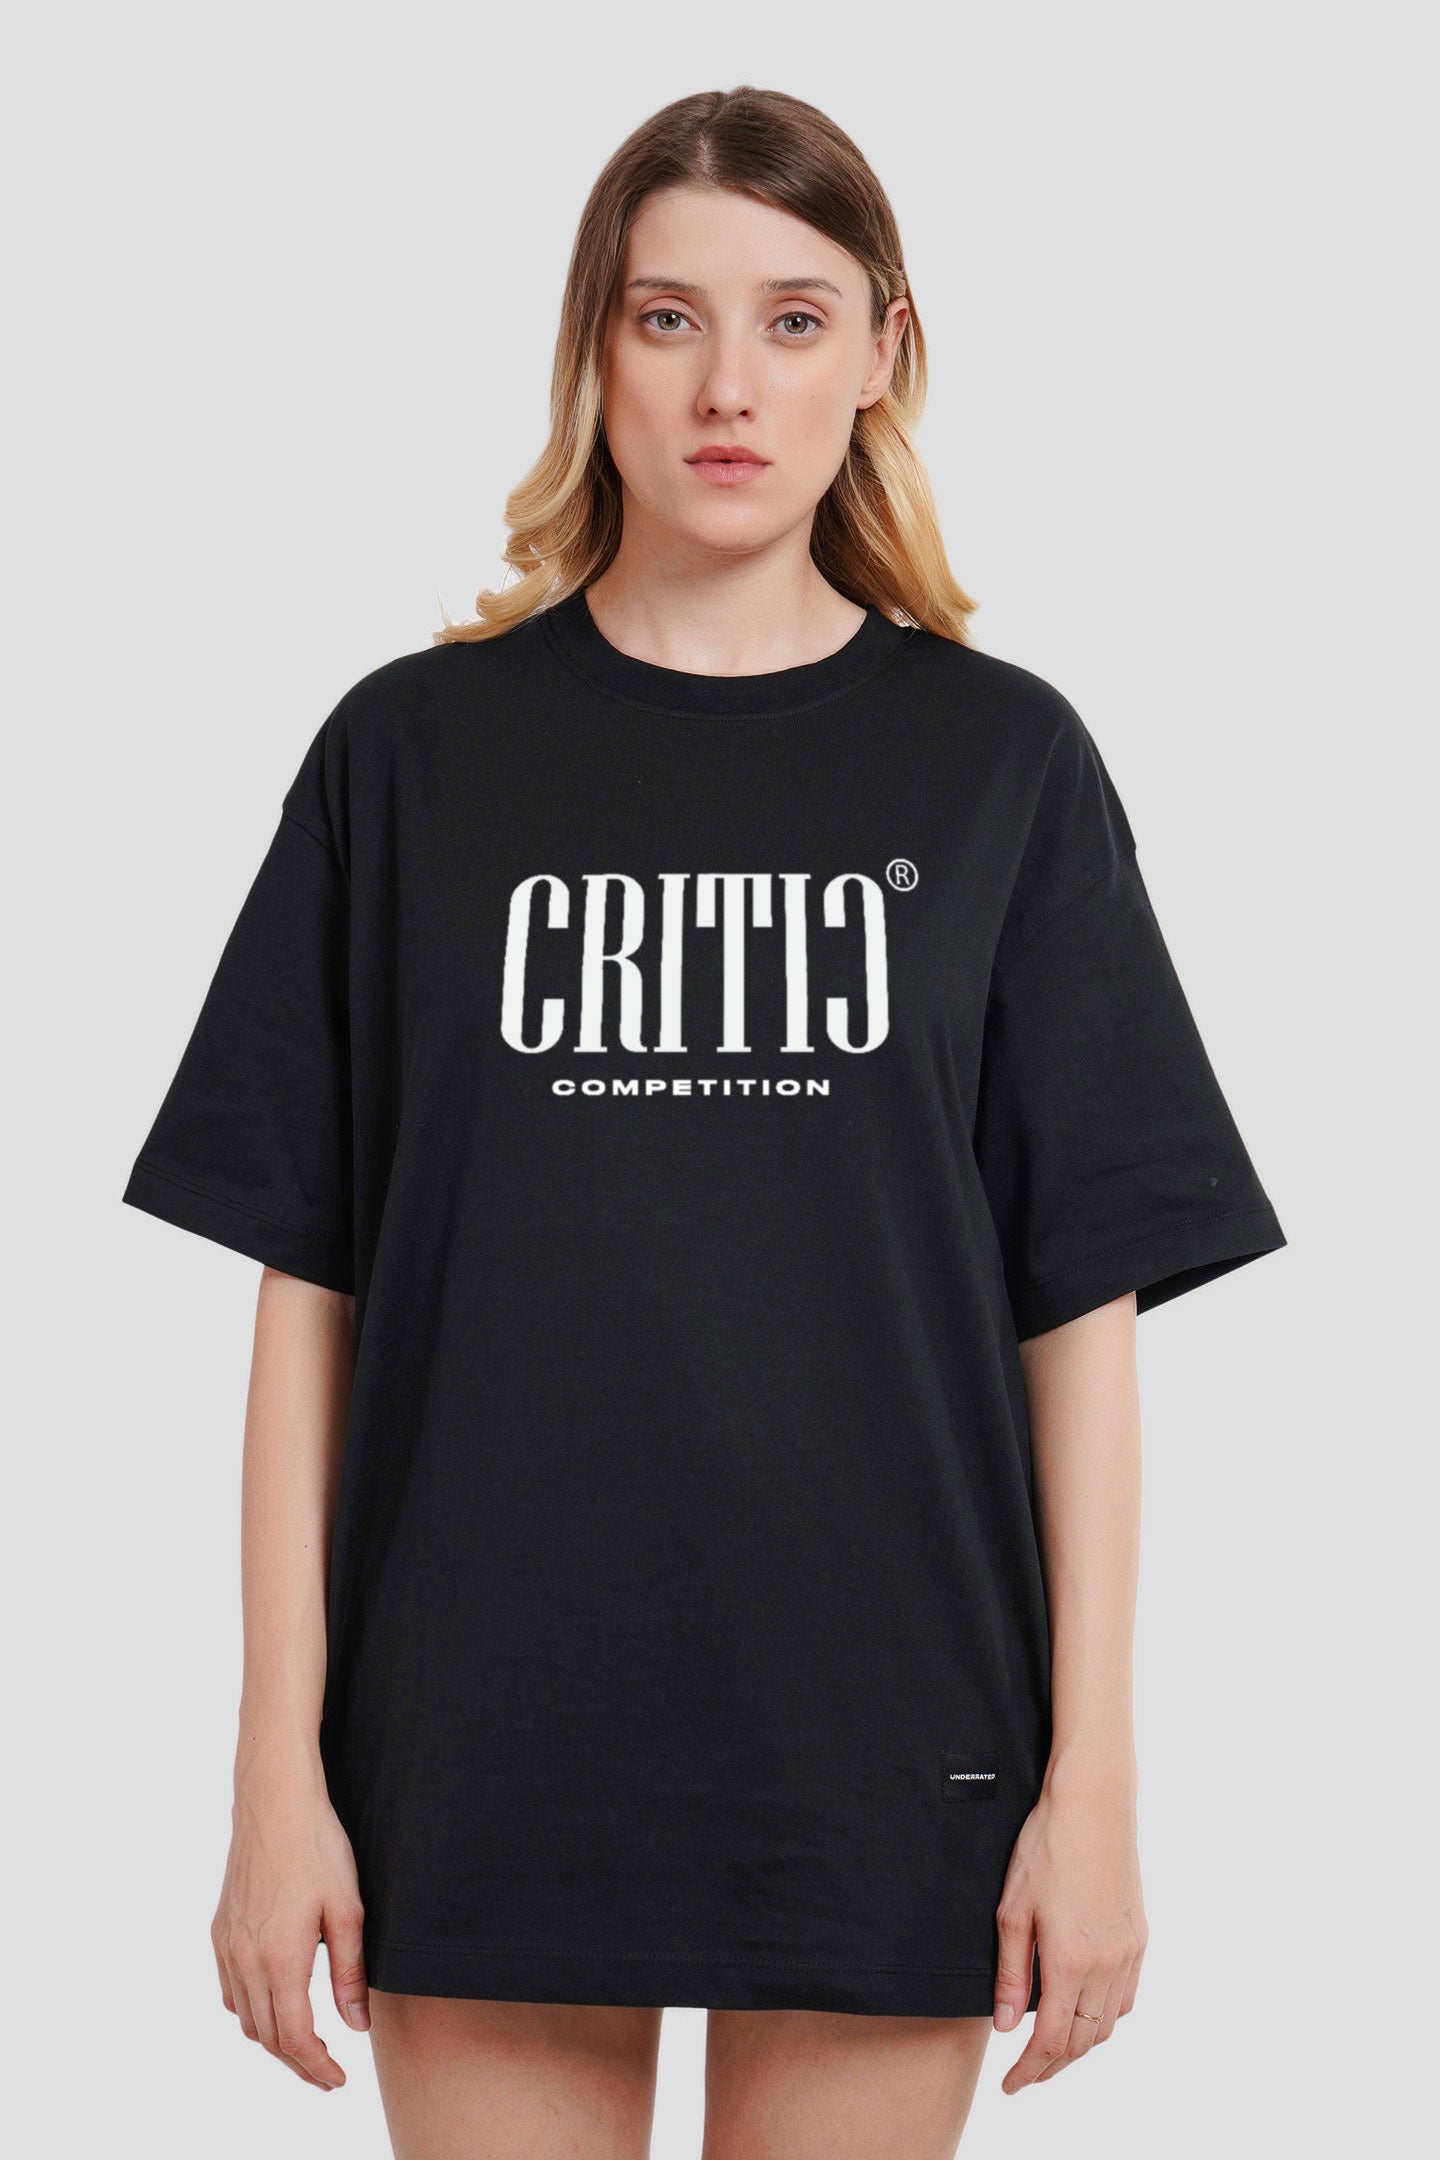 Critic Black Printed T-Shirt Women Oversized Fit With Front Design Pic 1